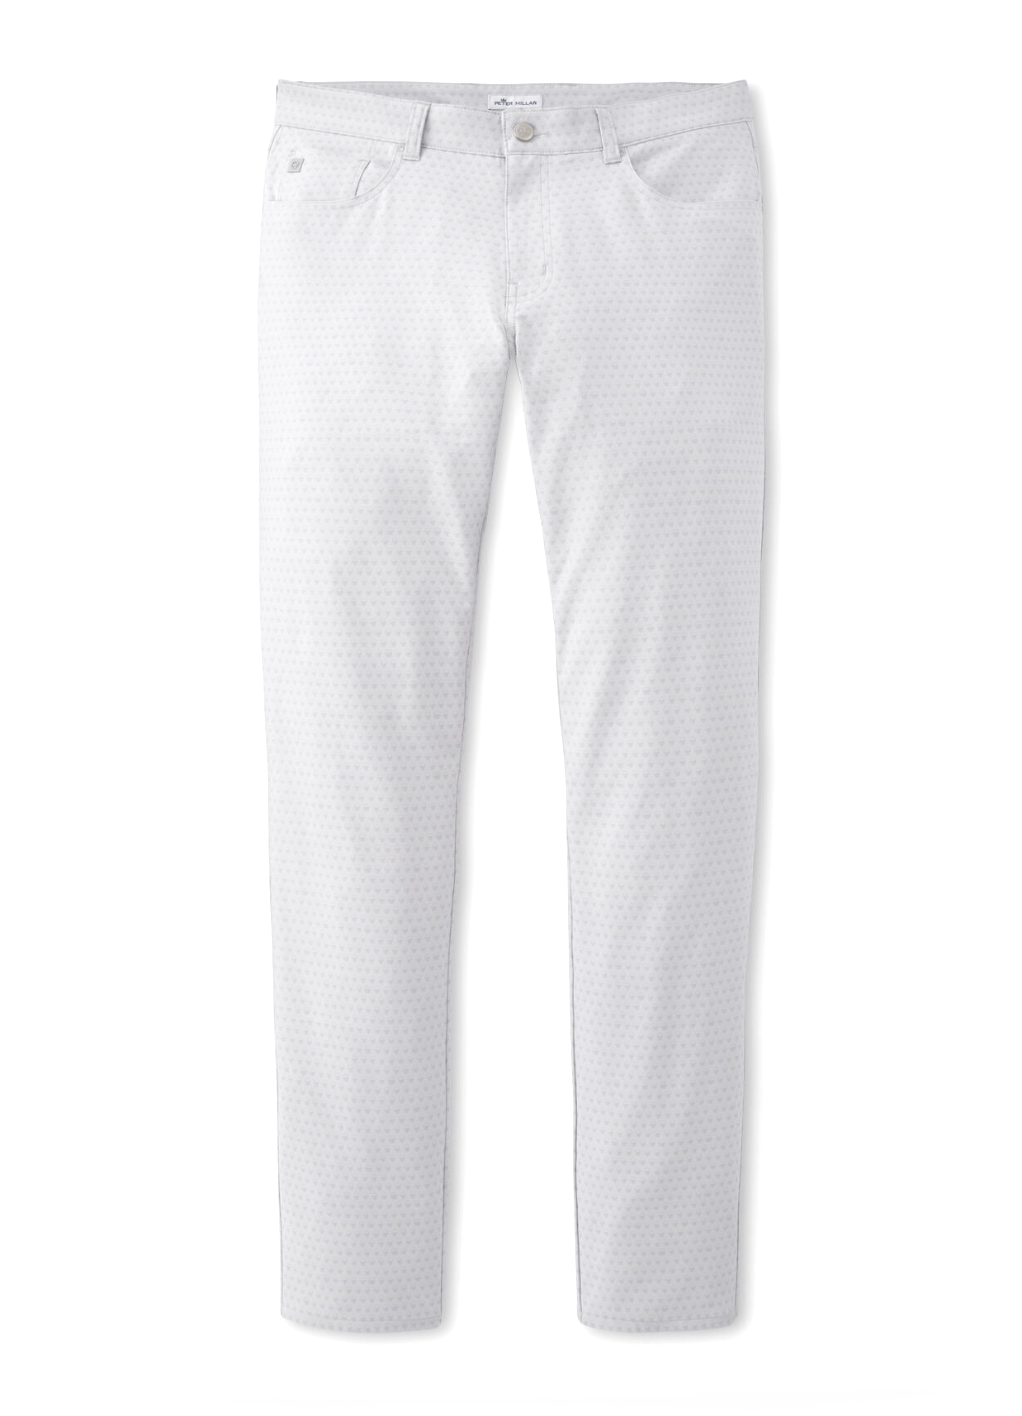 Surge Perf Trouser Gale Grey